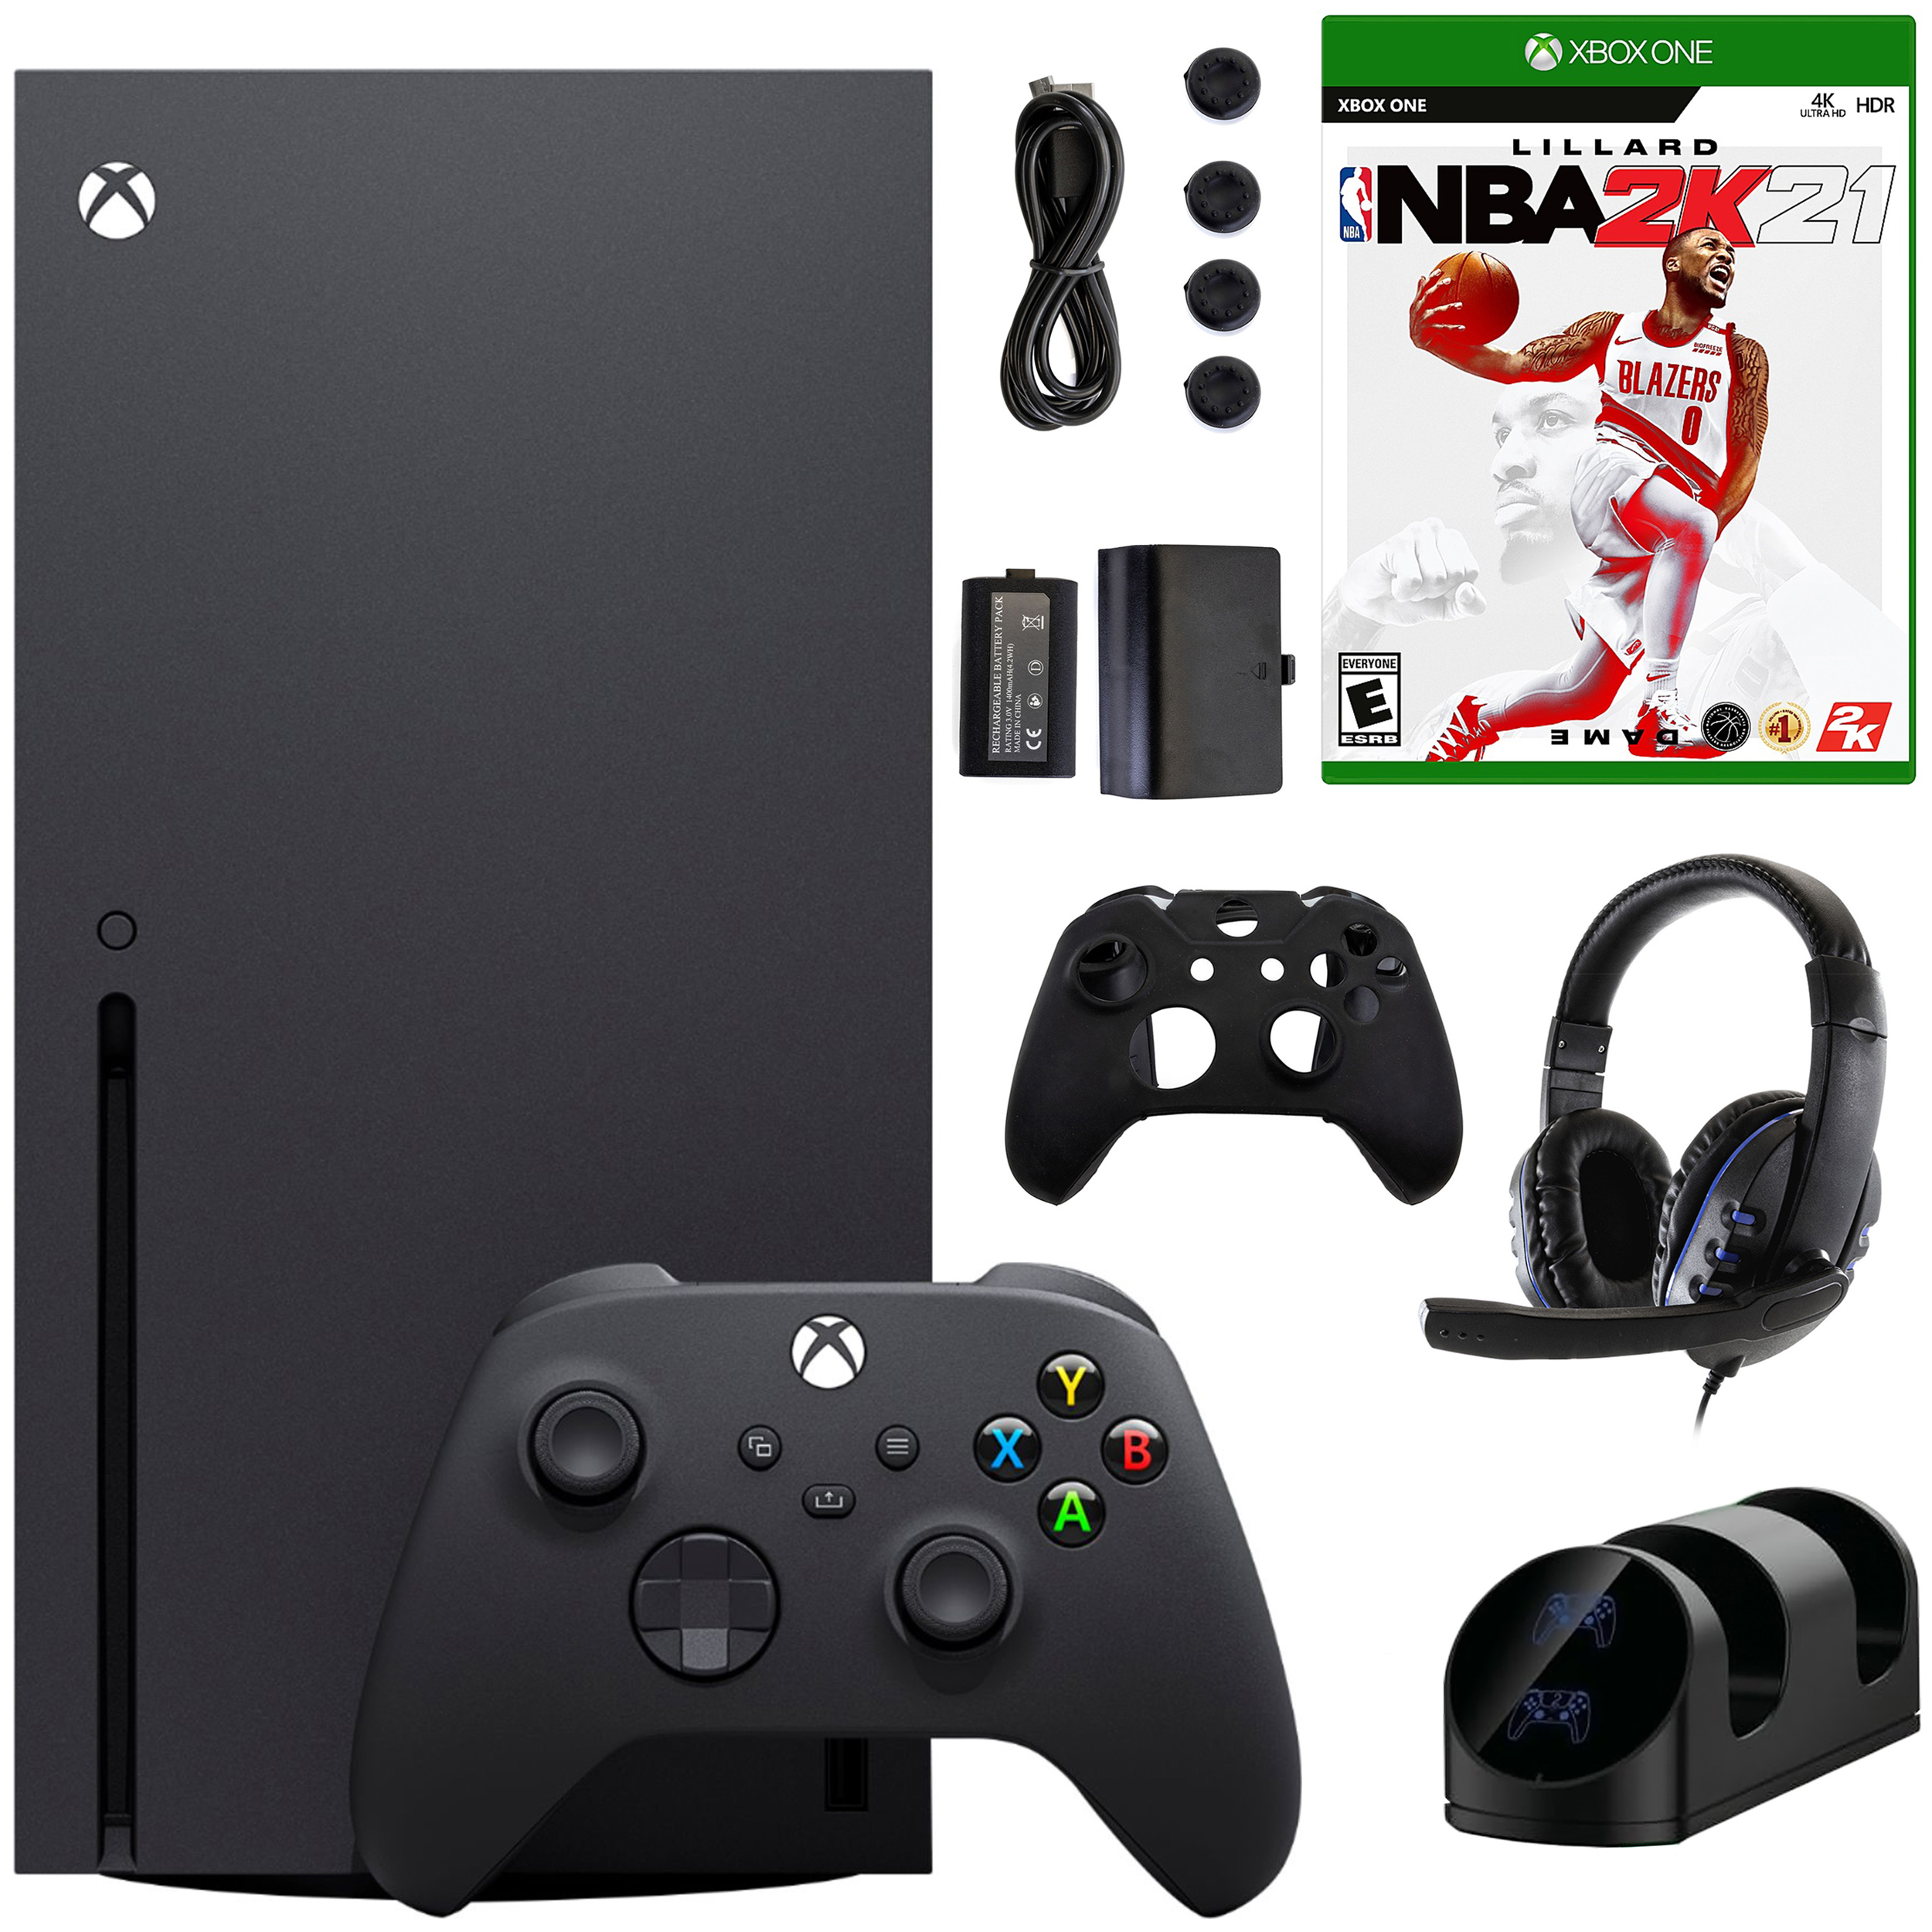 Microsoft Xbox Series X 1TB Console with NBA 2K21 and Accessories Kit